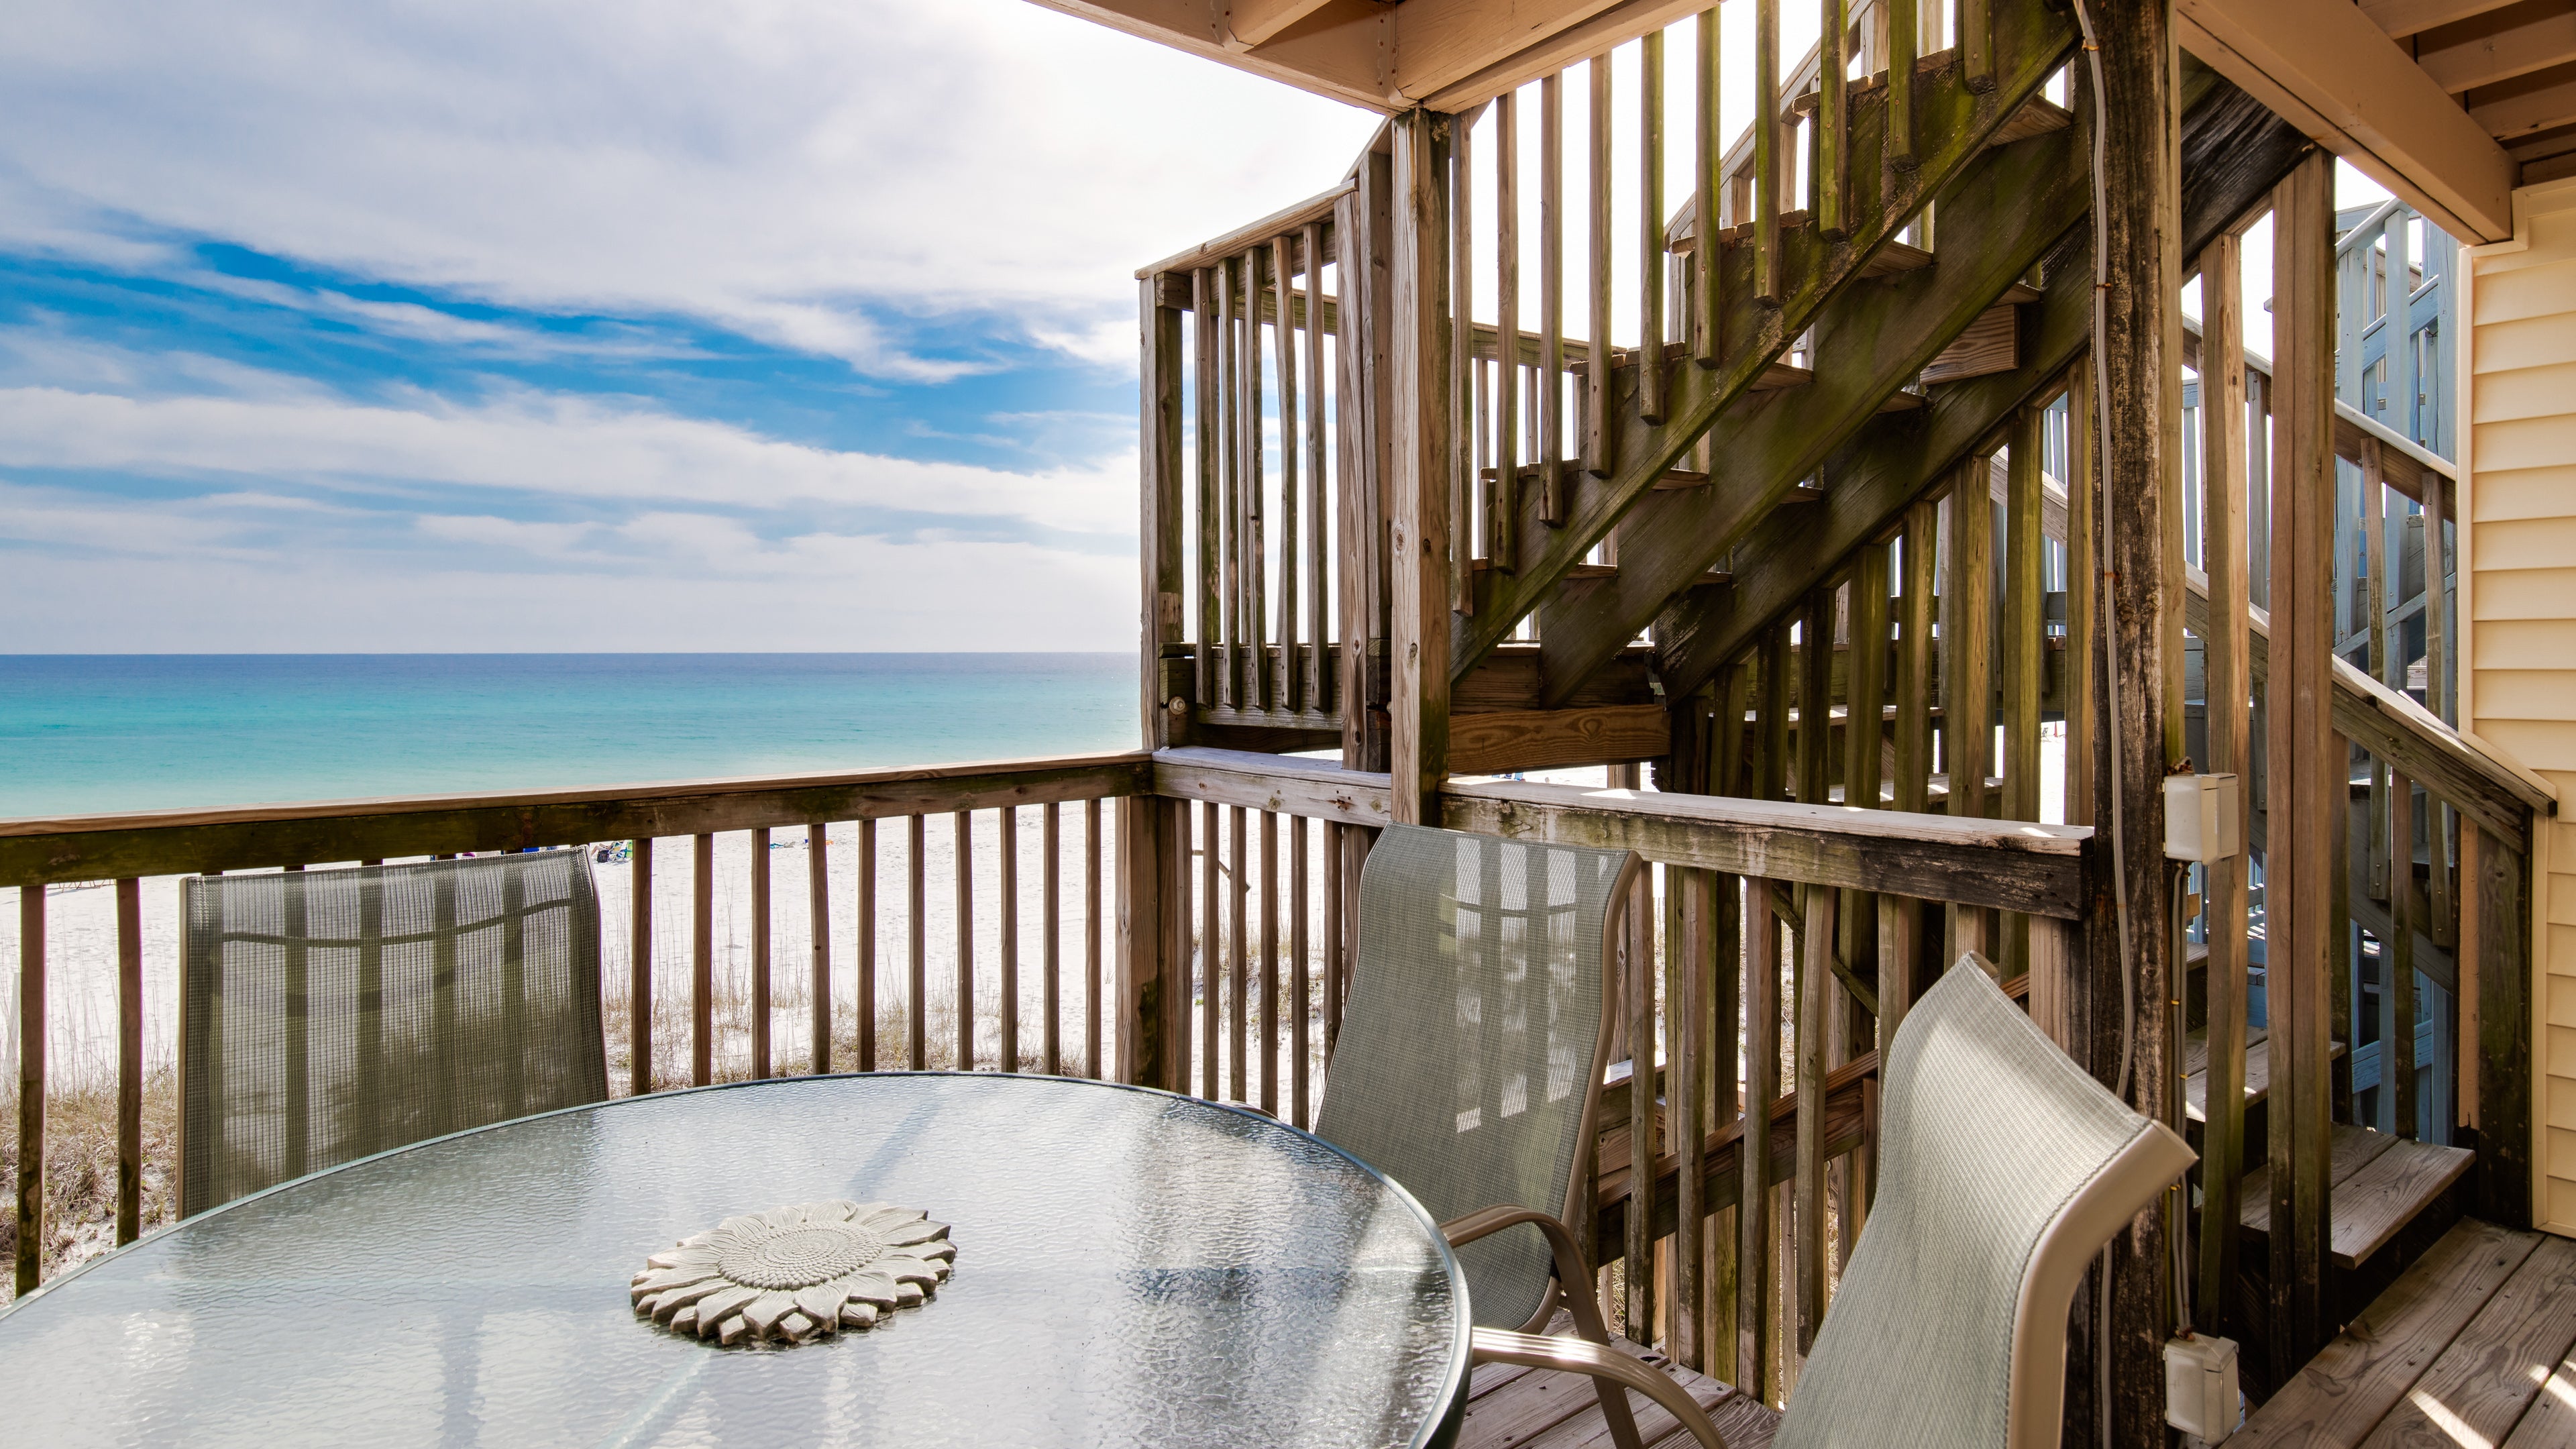 Walk out to this Deck overlooking the Beach